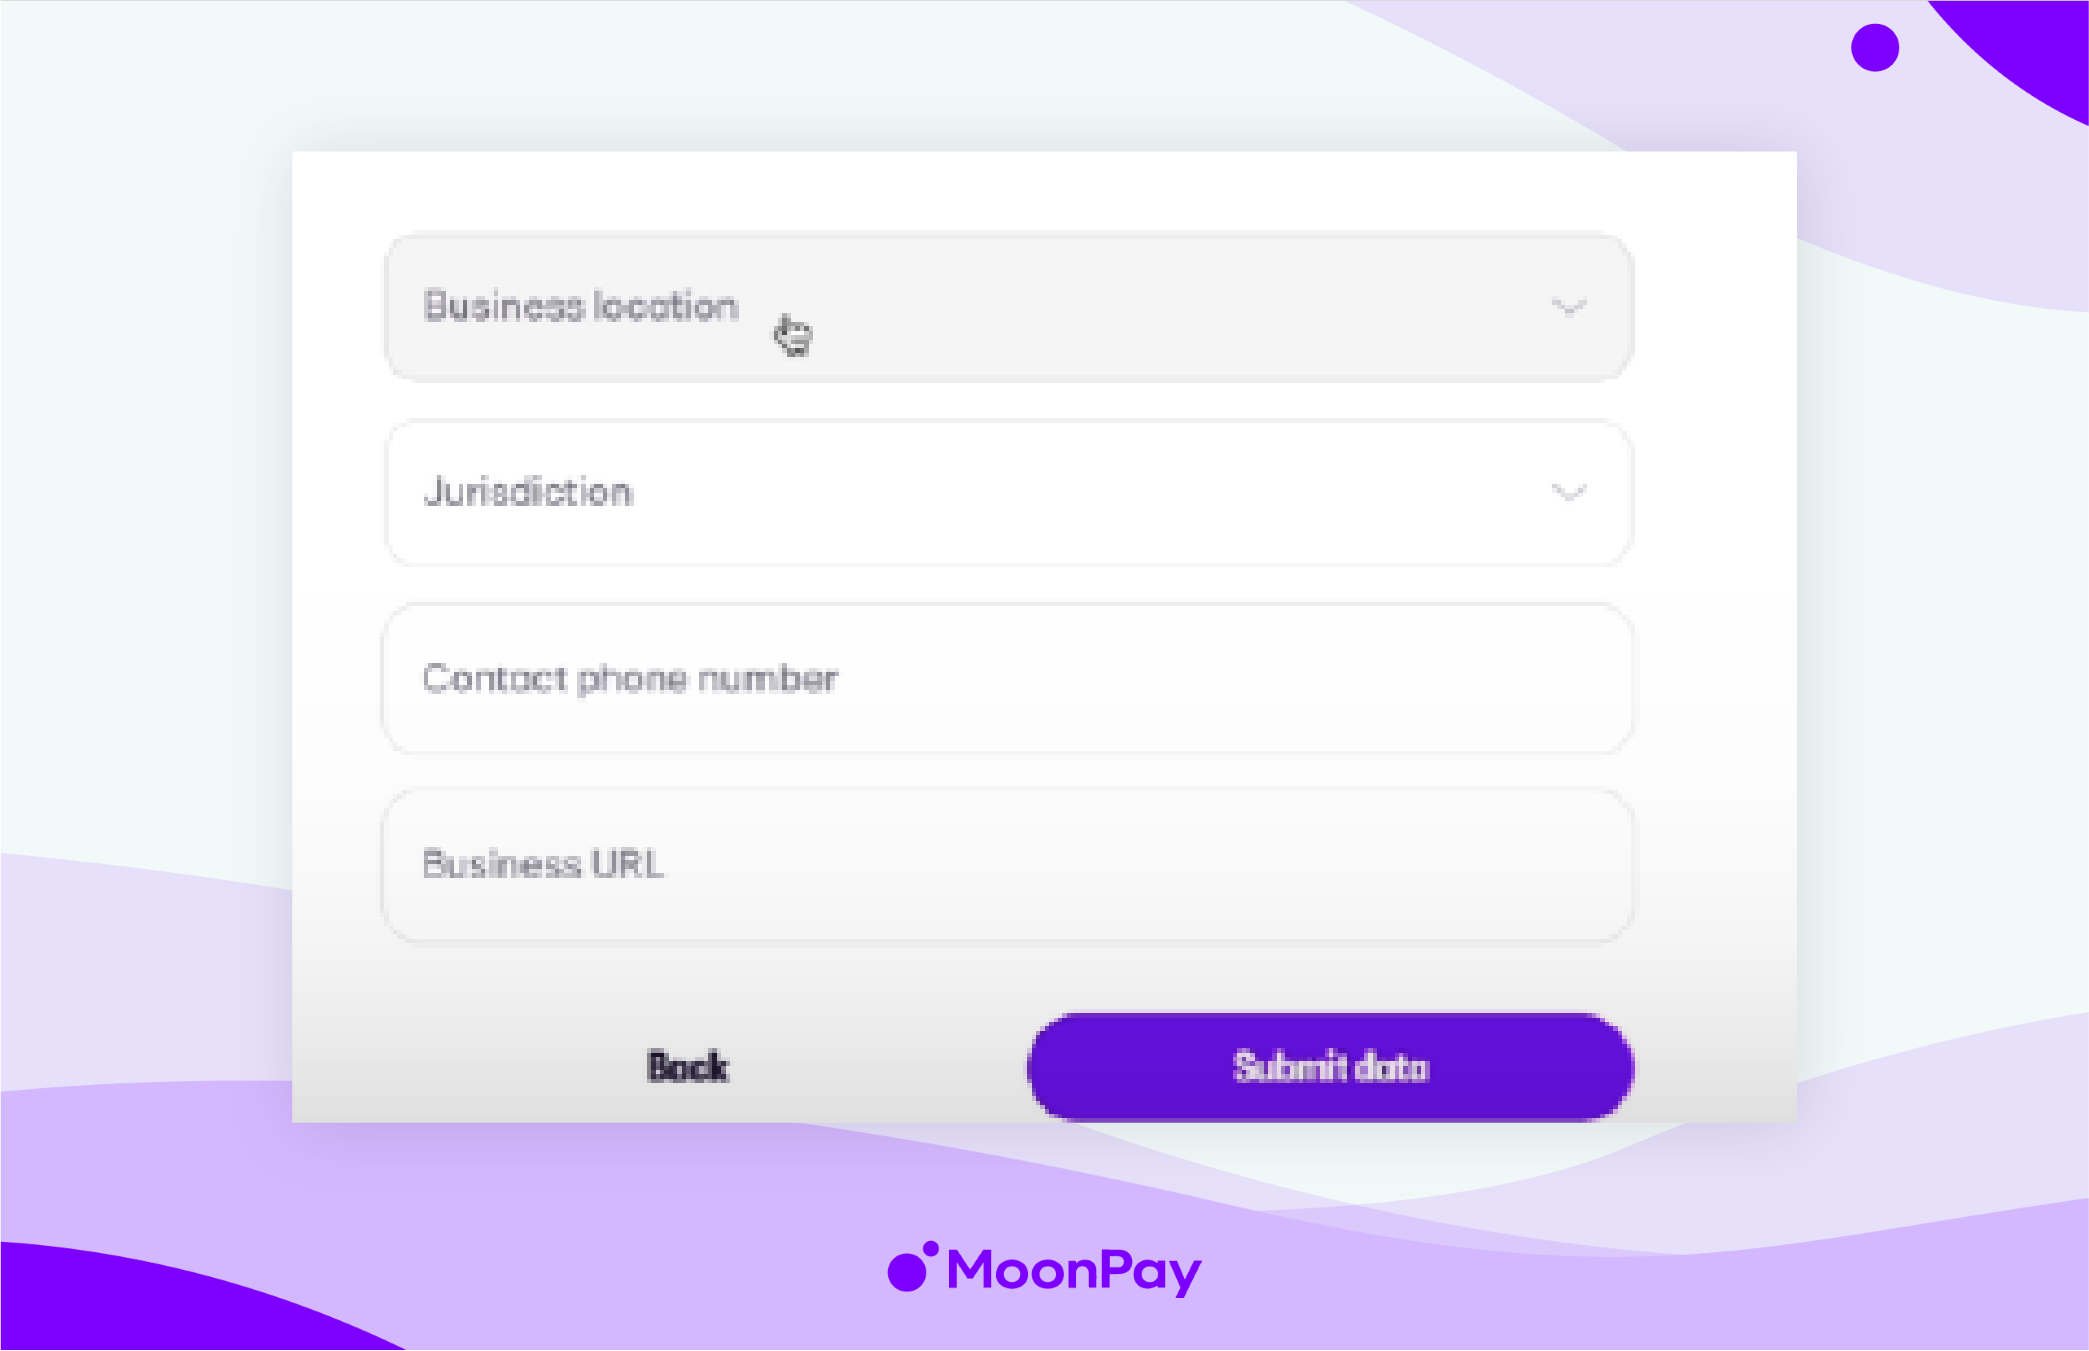 MoonPay's window shows the submit data button.